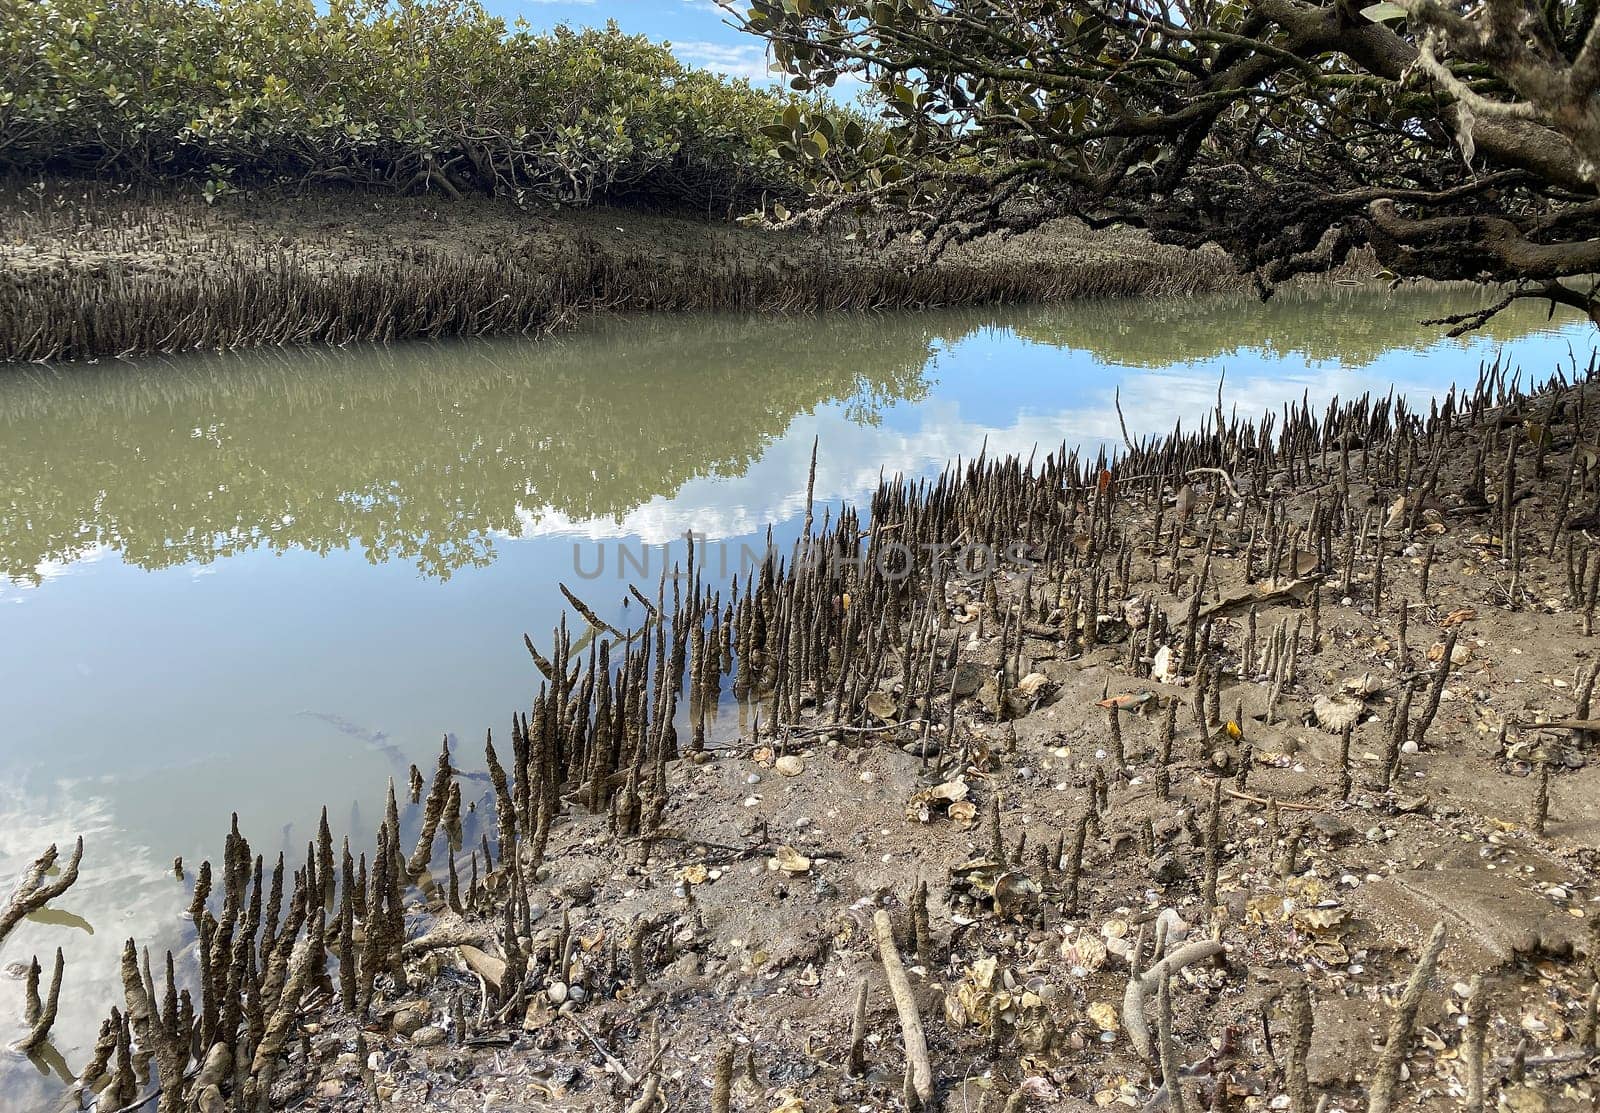 Green young Mangrove trees and pnematophores - roots growing from the bottom up for gas exchange. Planting mangroves in coastal sea lane, New Zealand by Proxima13